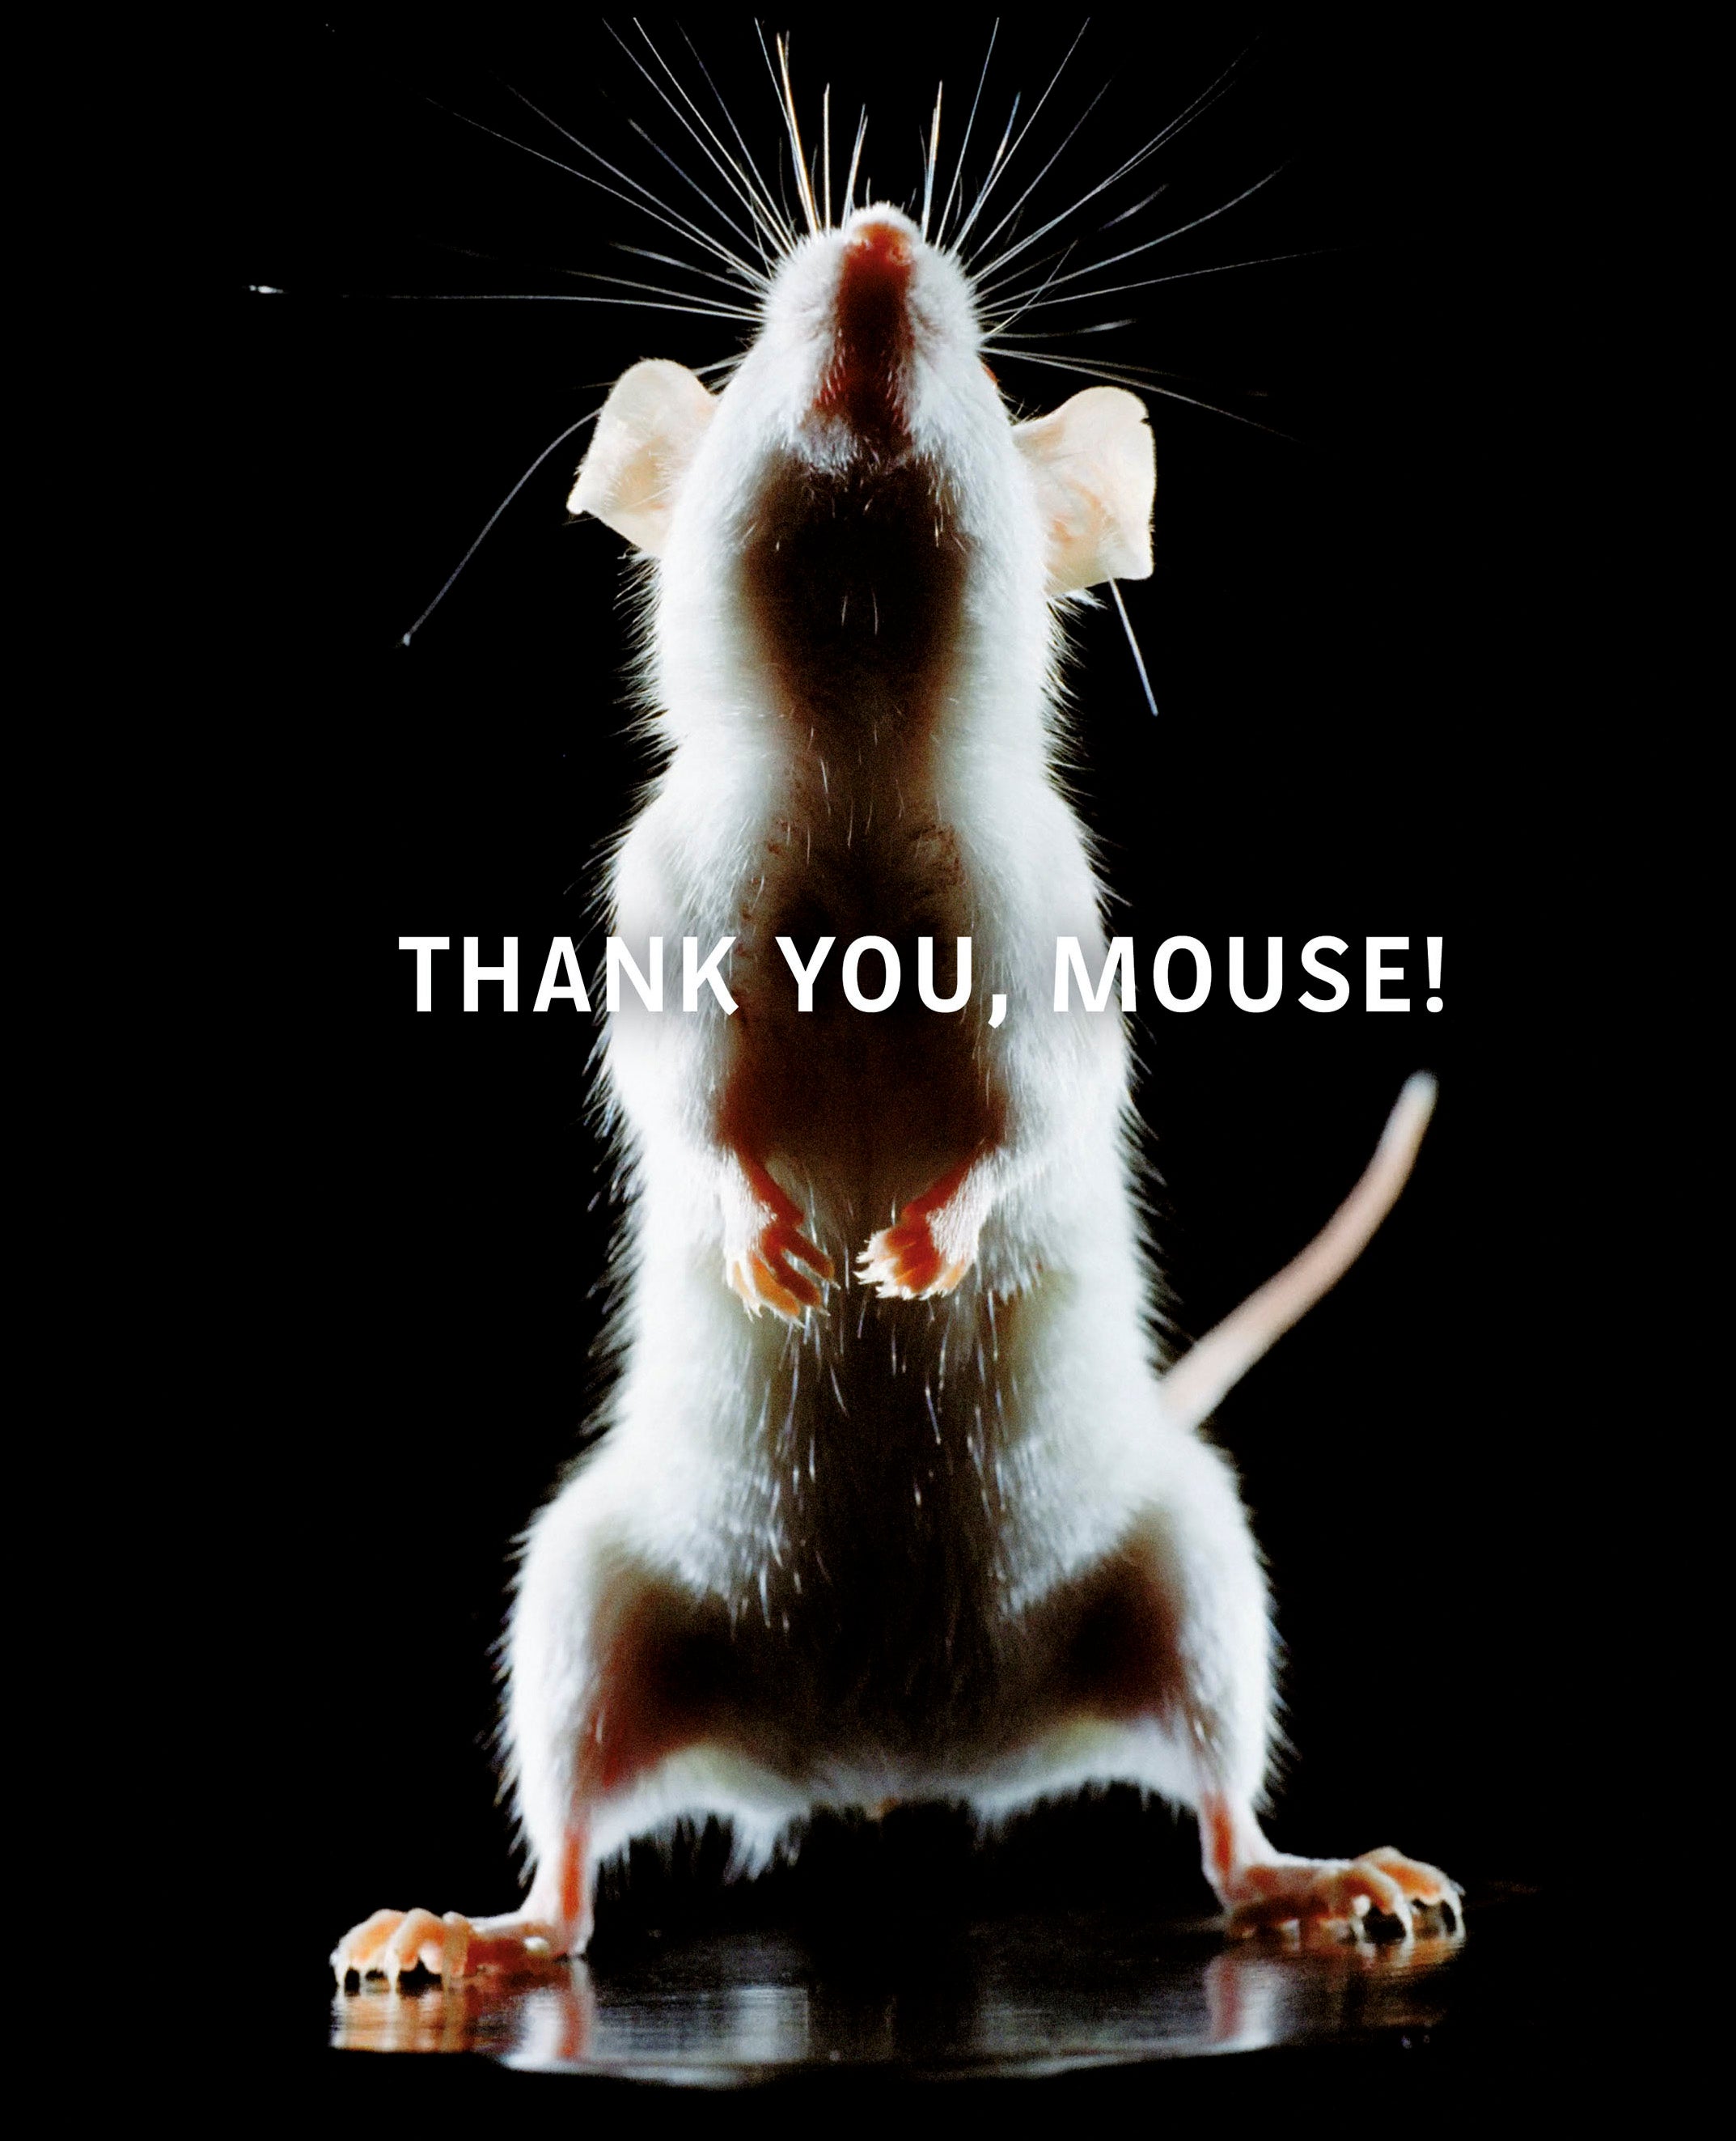 Thank you, mouse!